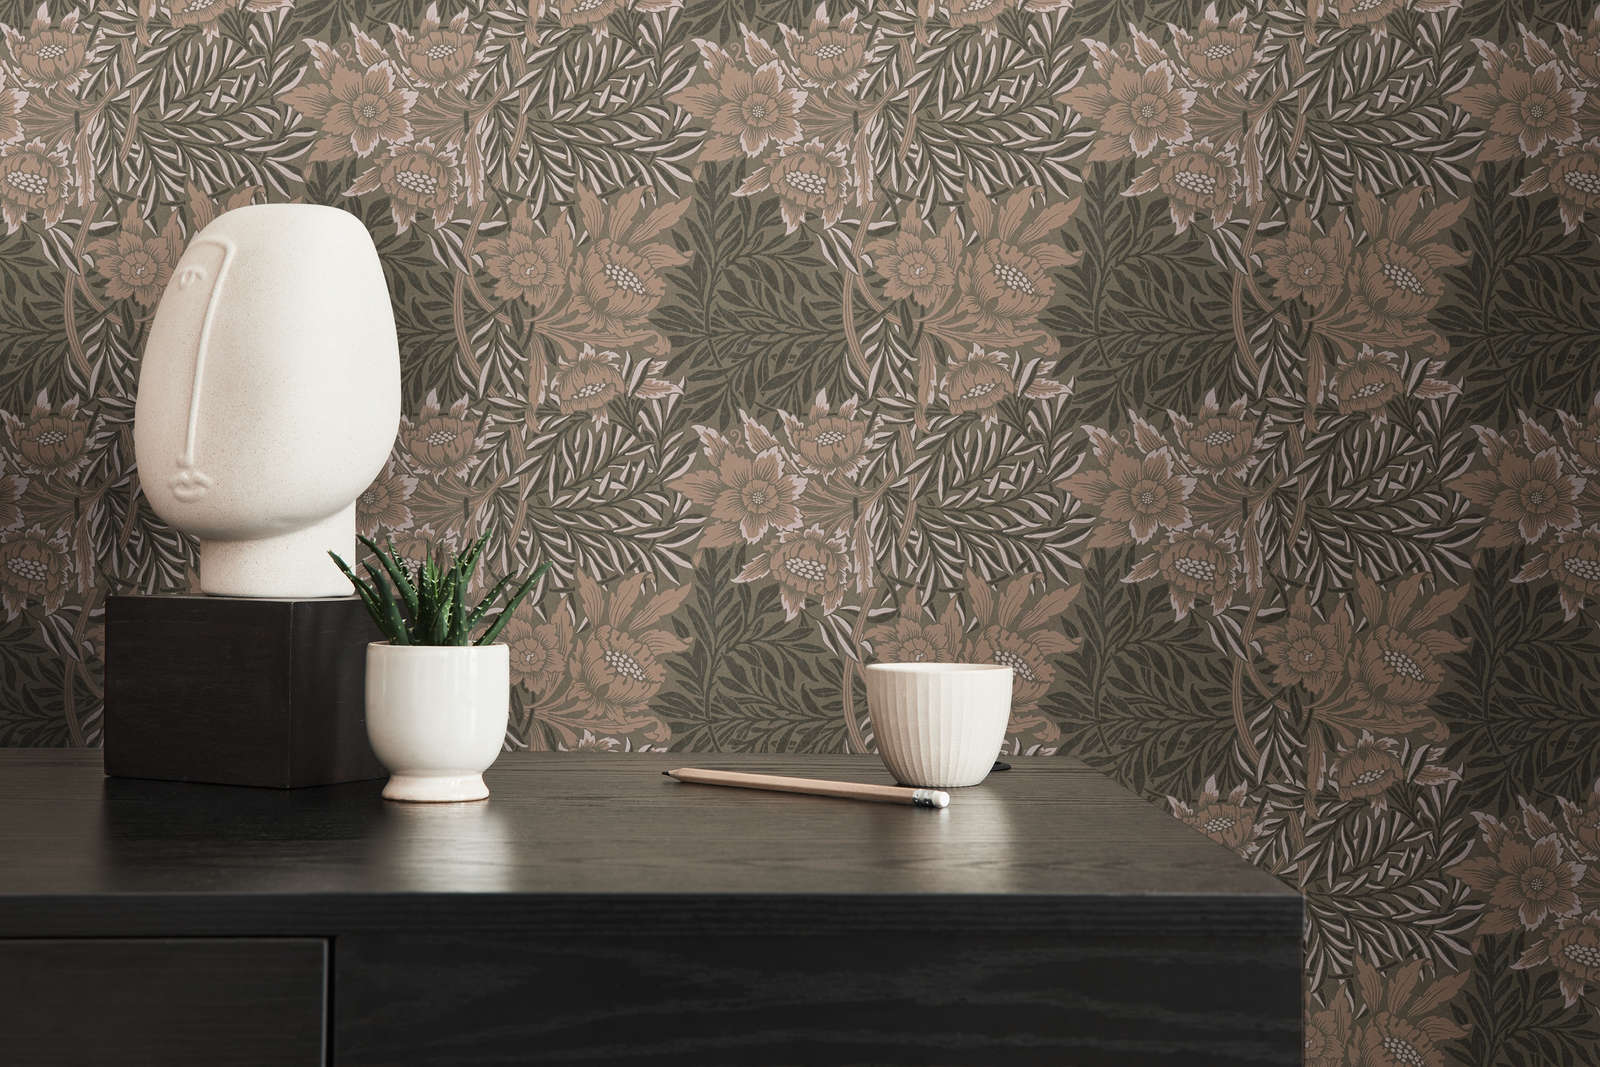             Floral wallpaper with leaf tendrils and flowers - brown, grey, white
        